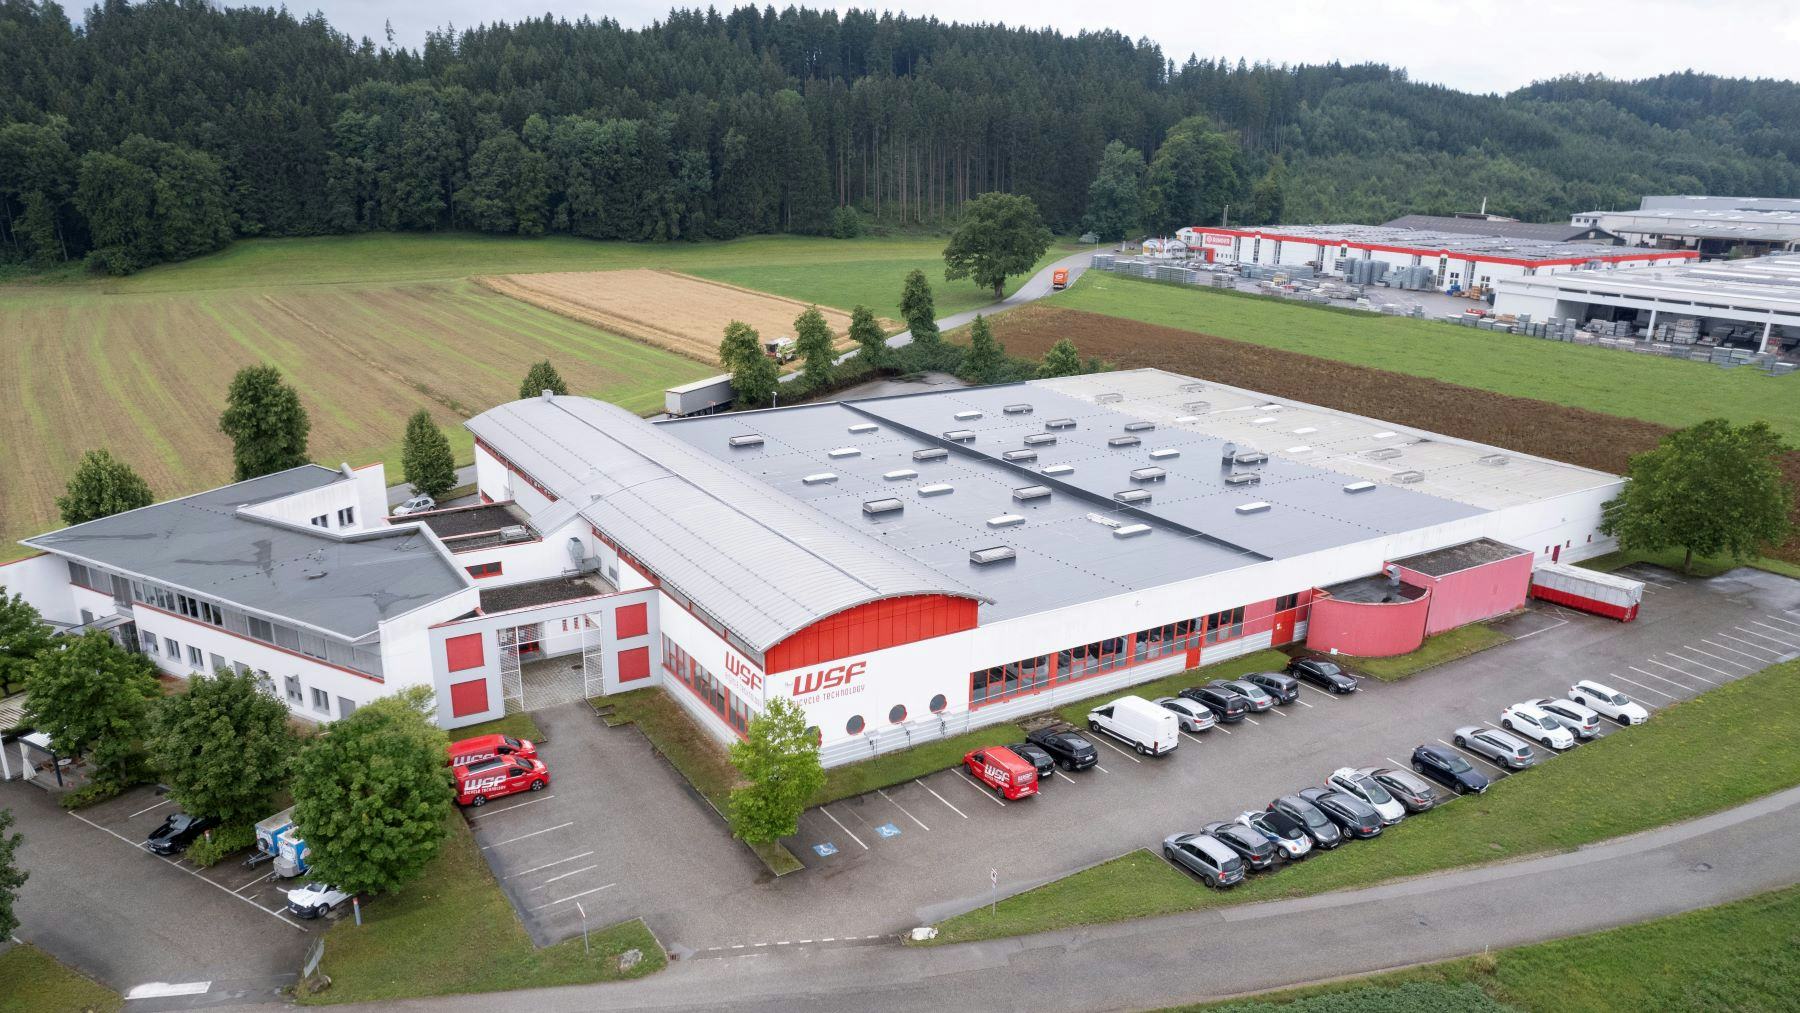 On the market since the end of 2020, contract manufacturer WSF Technology GmbH is based in Regau, Upper Austria. – Photo Visus Studios